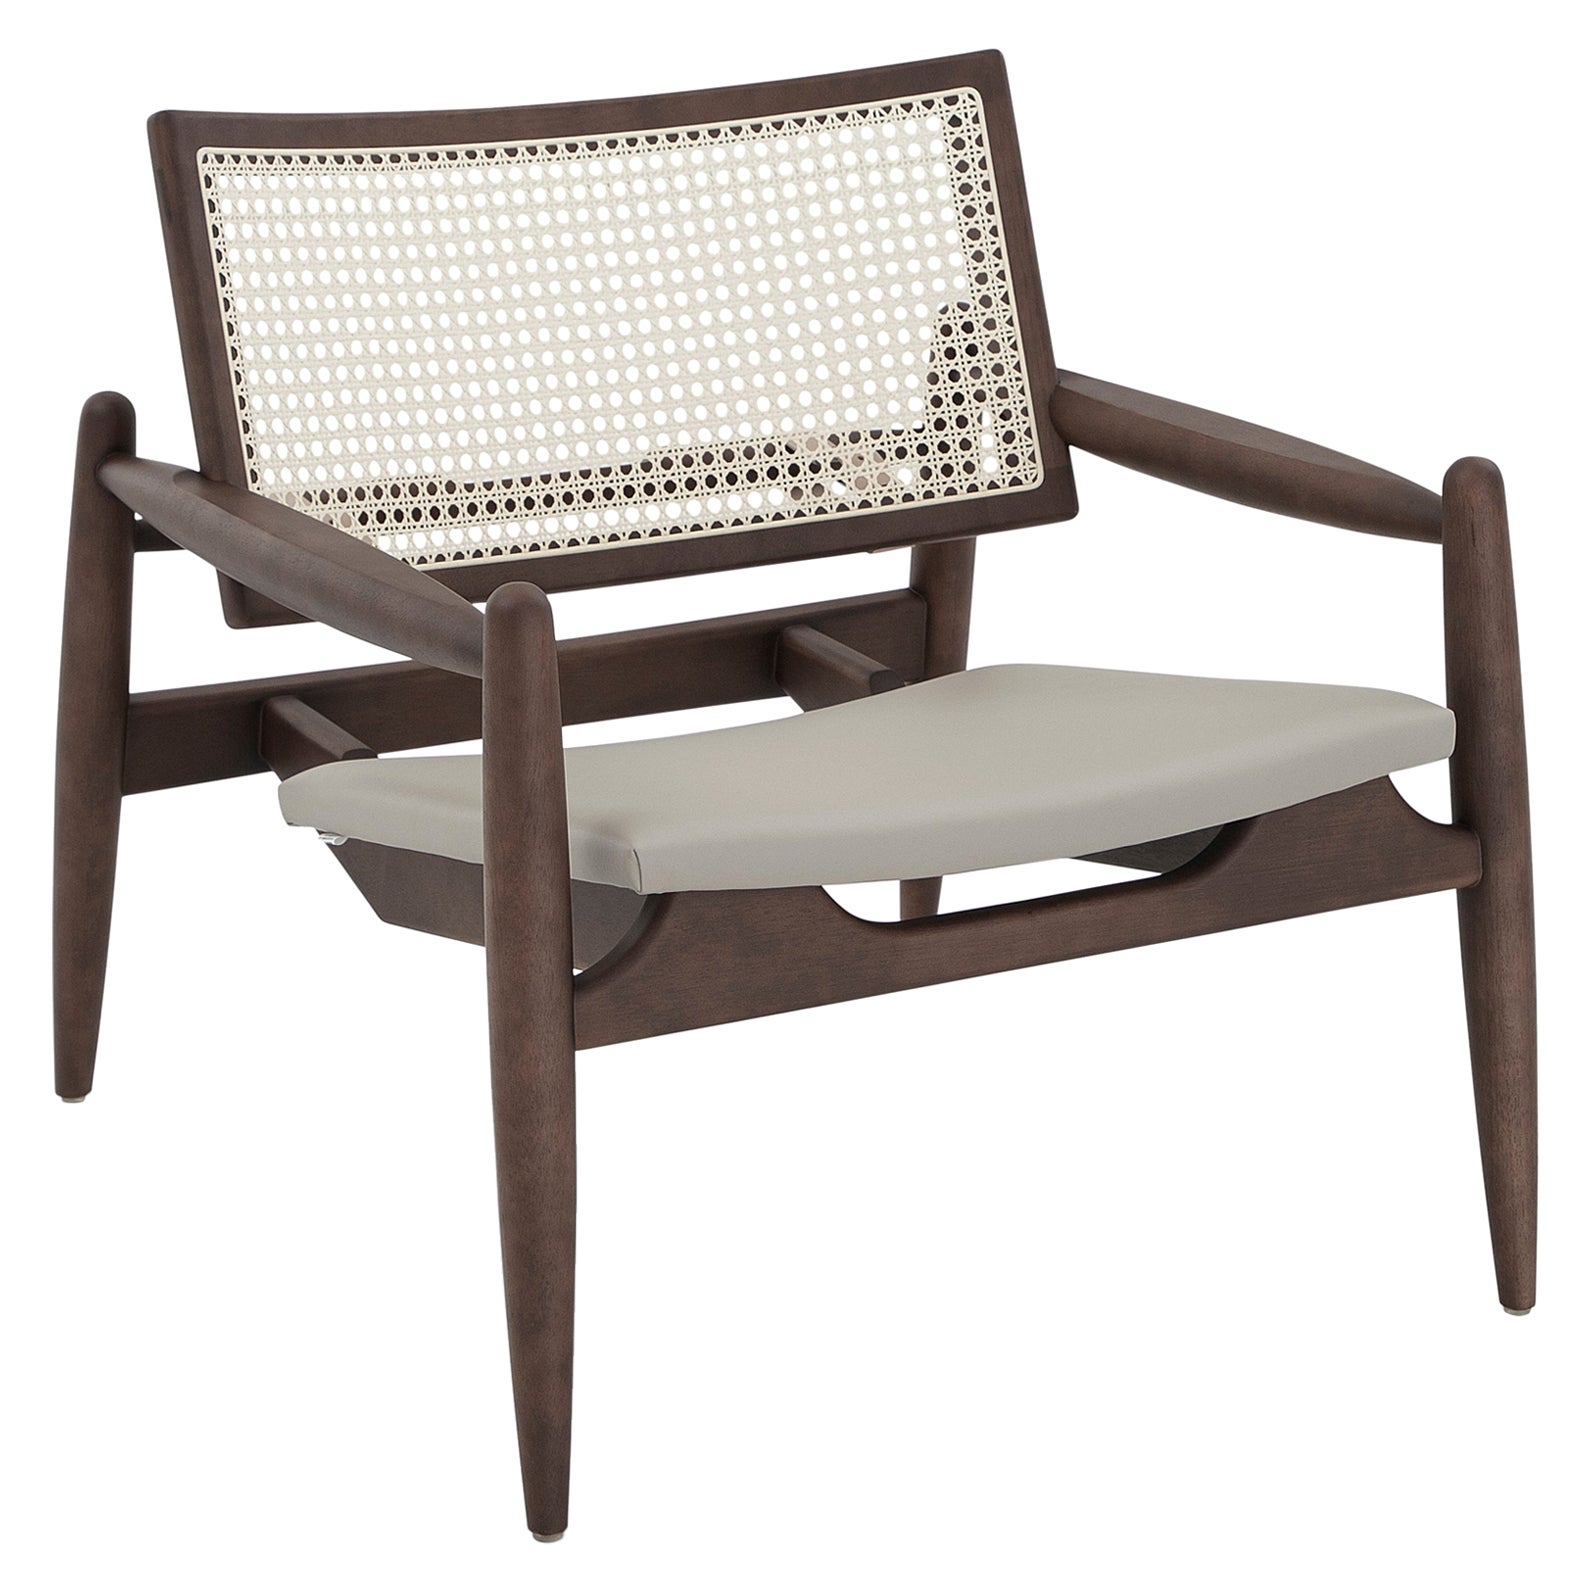 Soho Curved Cane-Back Chair in Walnut Wood Finish with Gray Leather Chair Seat